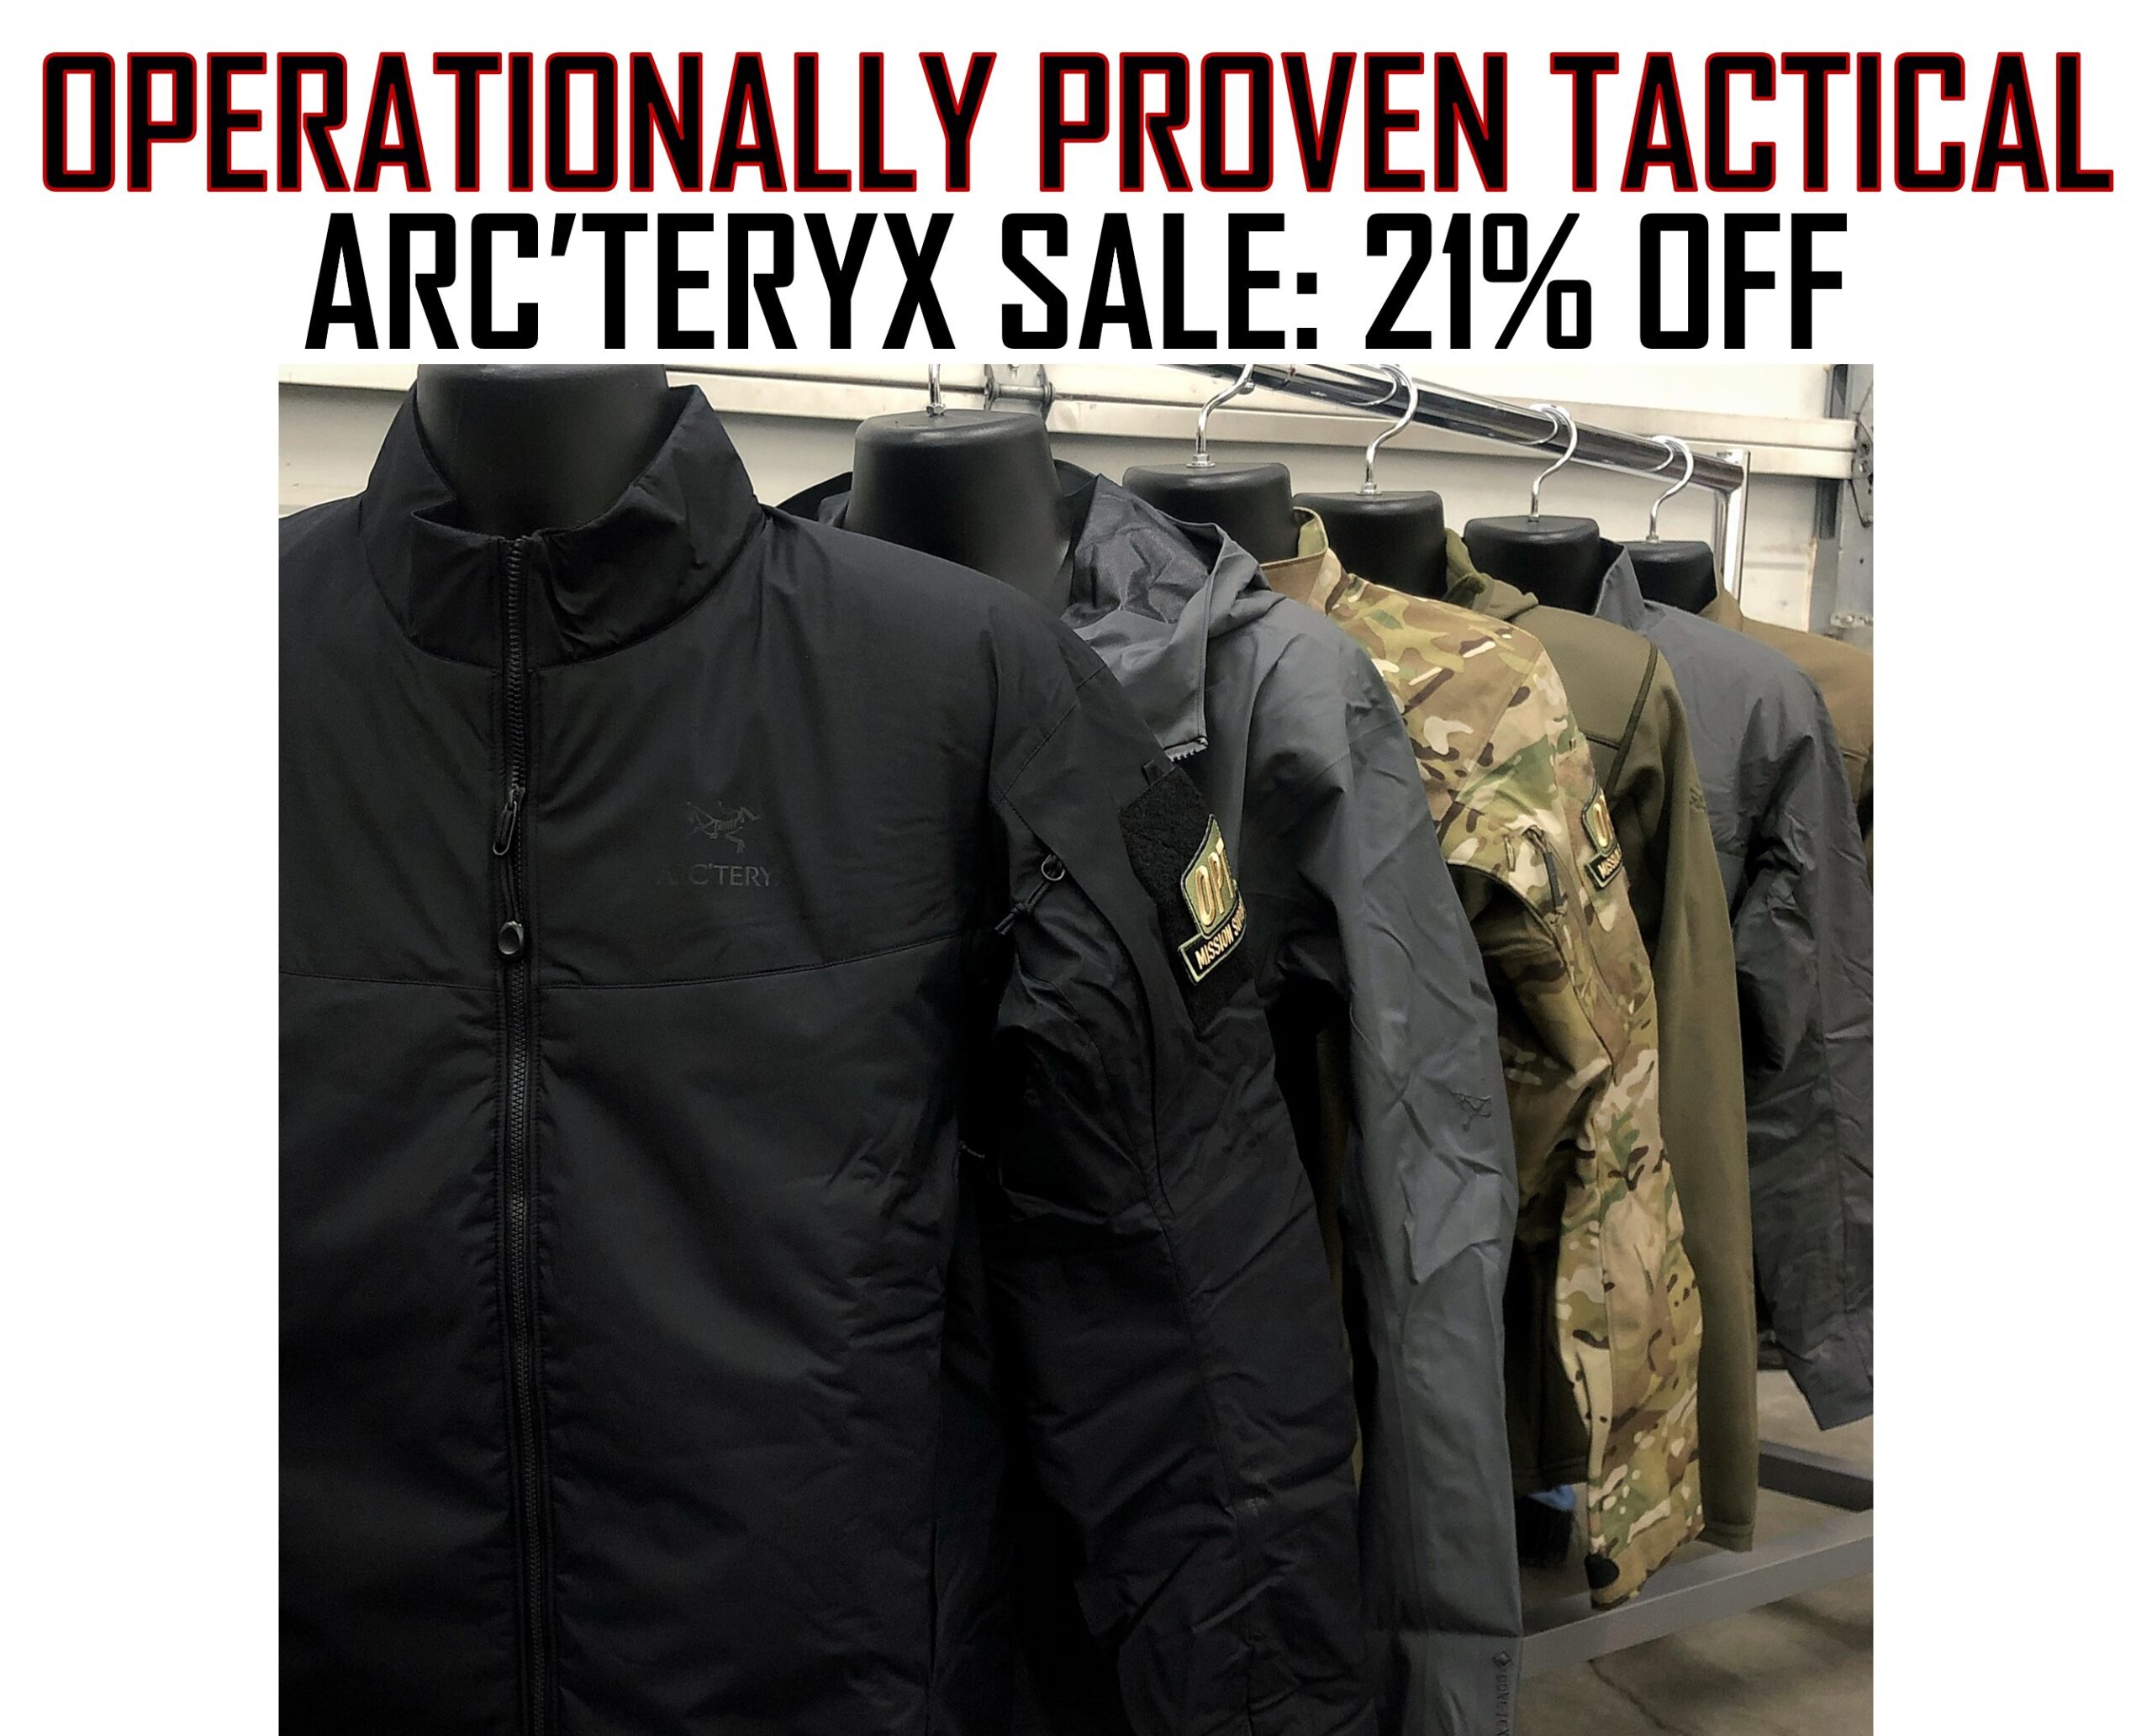 O P Tactical Arc’Teryx Sale! - Soldier Systems Daily